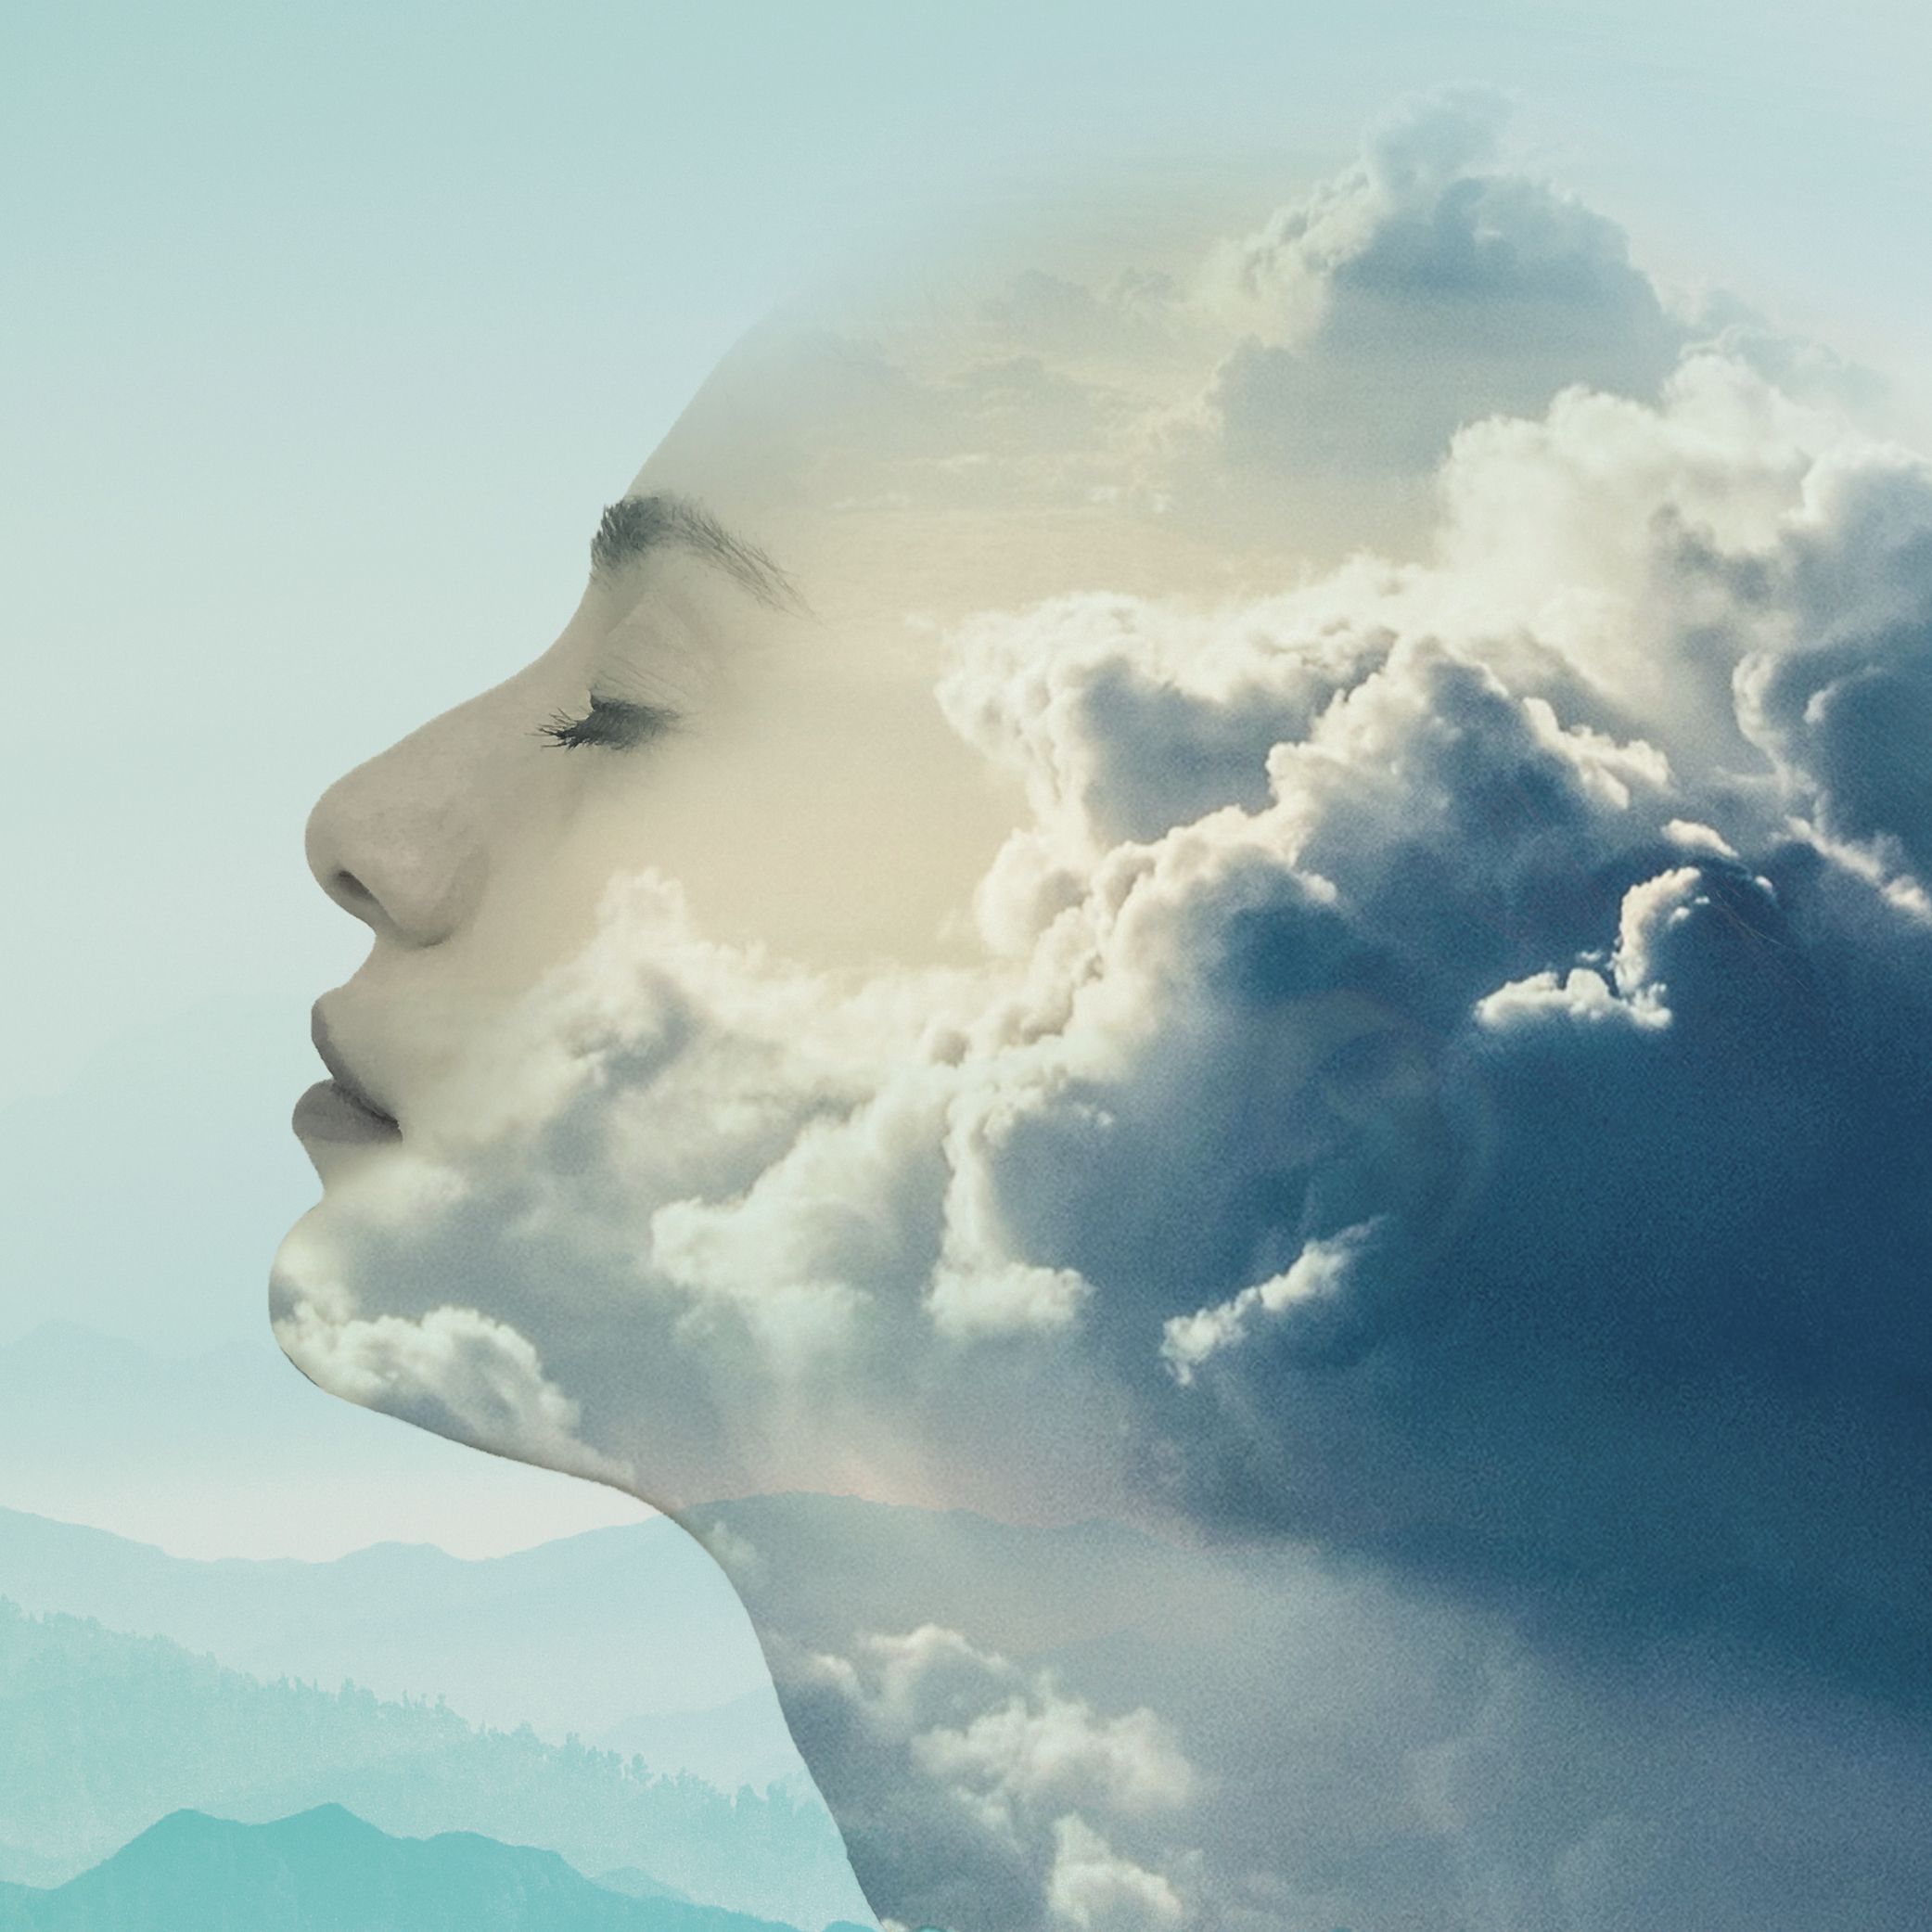 woman's face merging with clouds